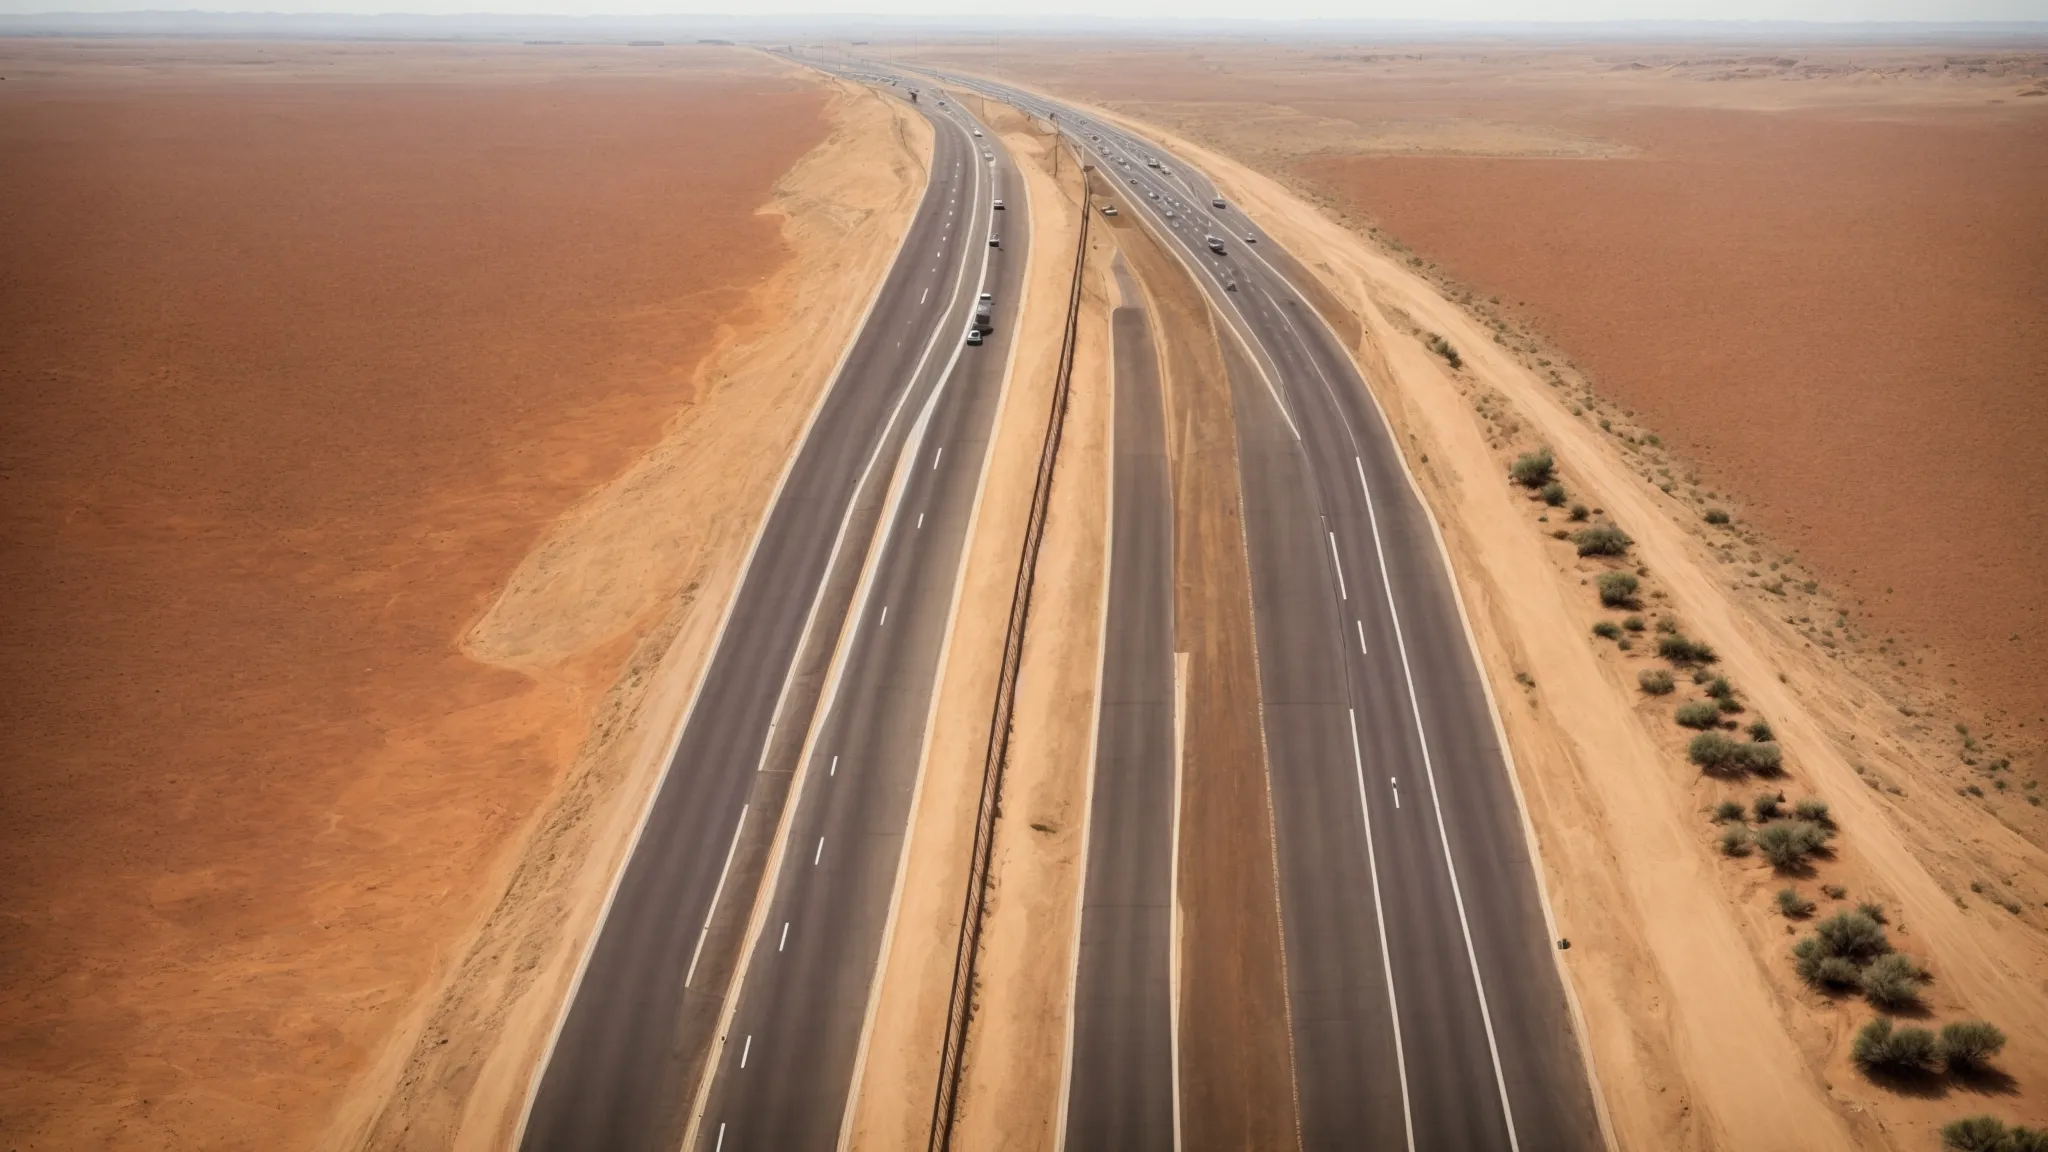 a wide highway with multiple lanes facilitating smooth traffic flow across expansive, arid african landscapes.